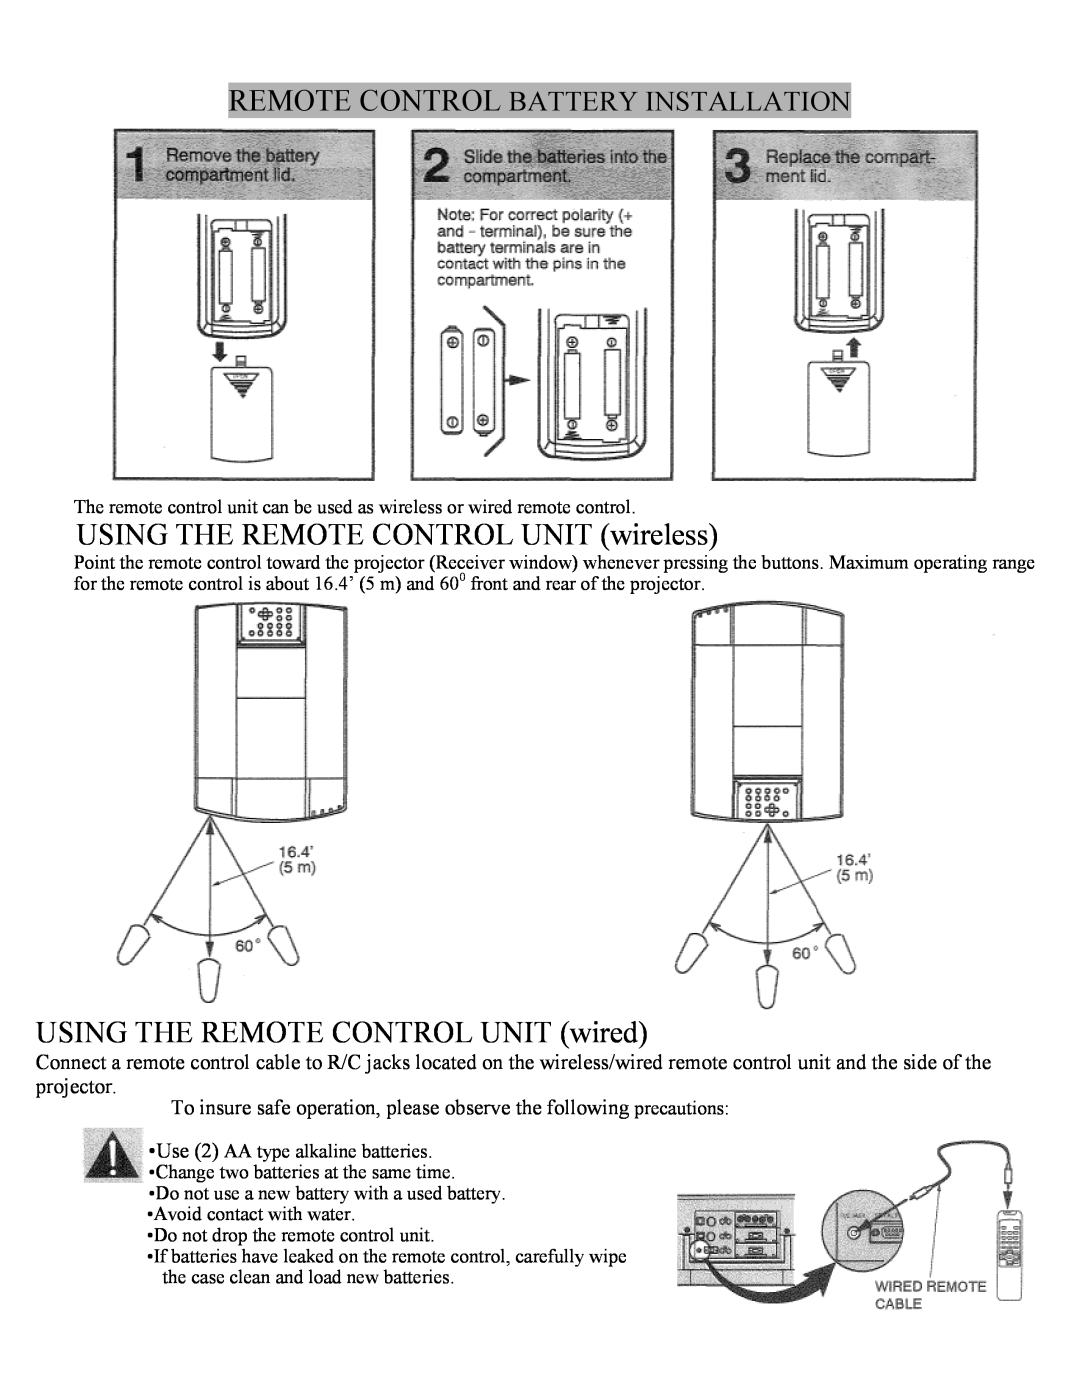 Eiki LC-X1UL, LC-X1UA instruction manual USING THE REMOTE CONTROL UNIT wireless, USING THE REMOTE CONTROL UNIT wired 